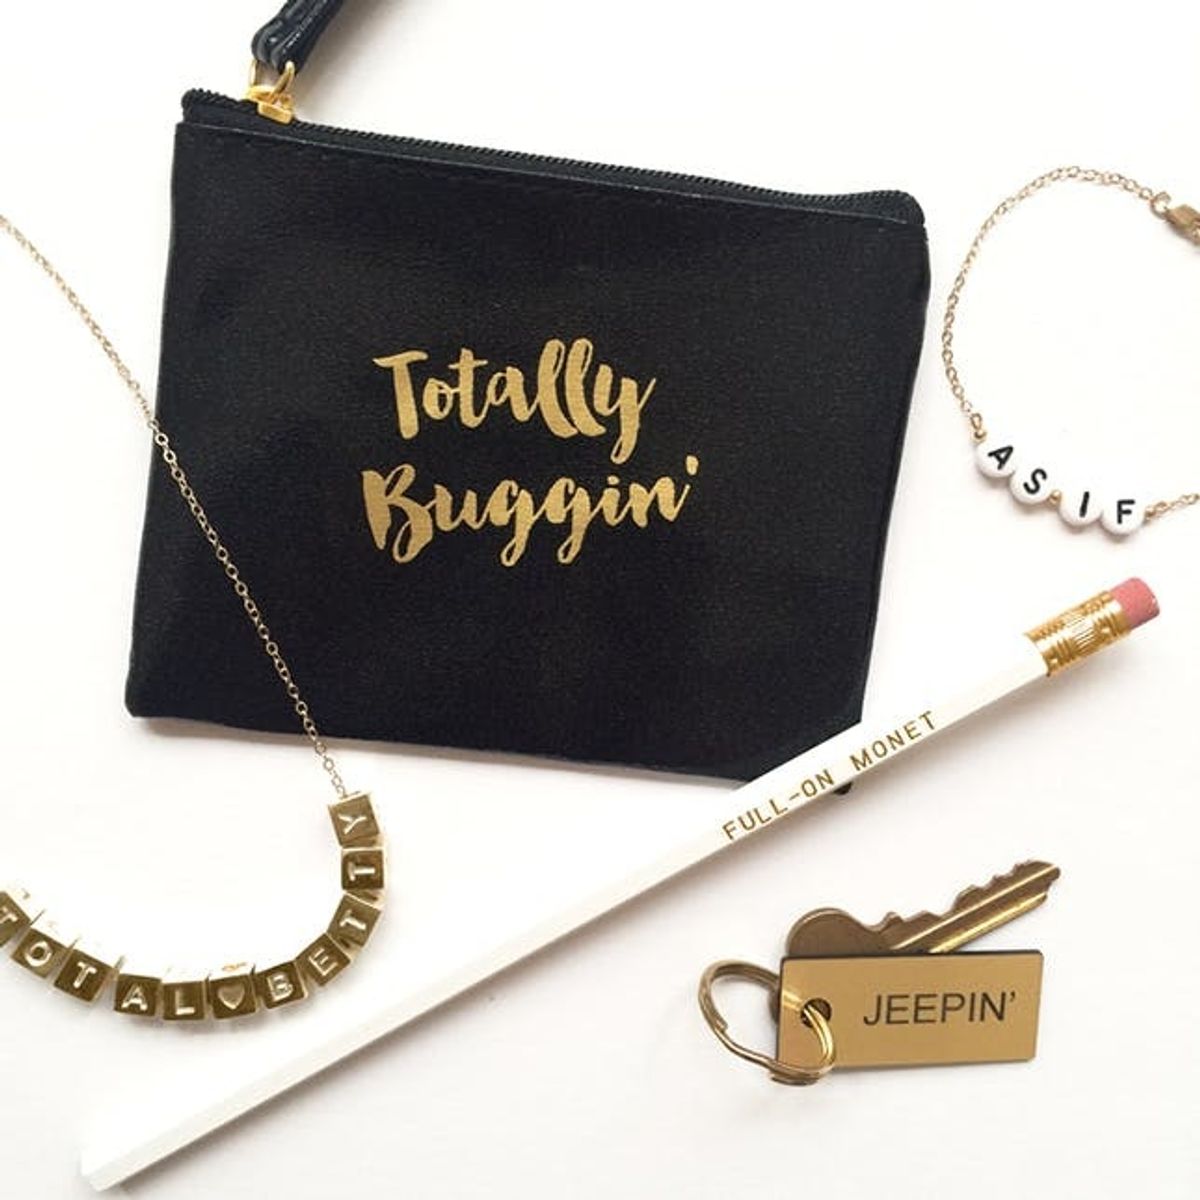 We’re Totally Buggin’ Over This Clueless-Inspired Jewelry